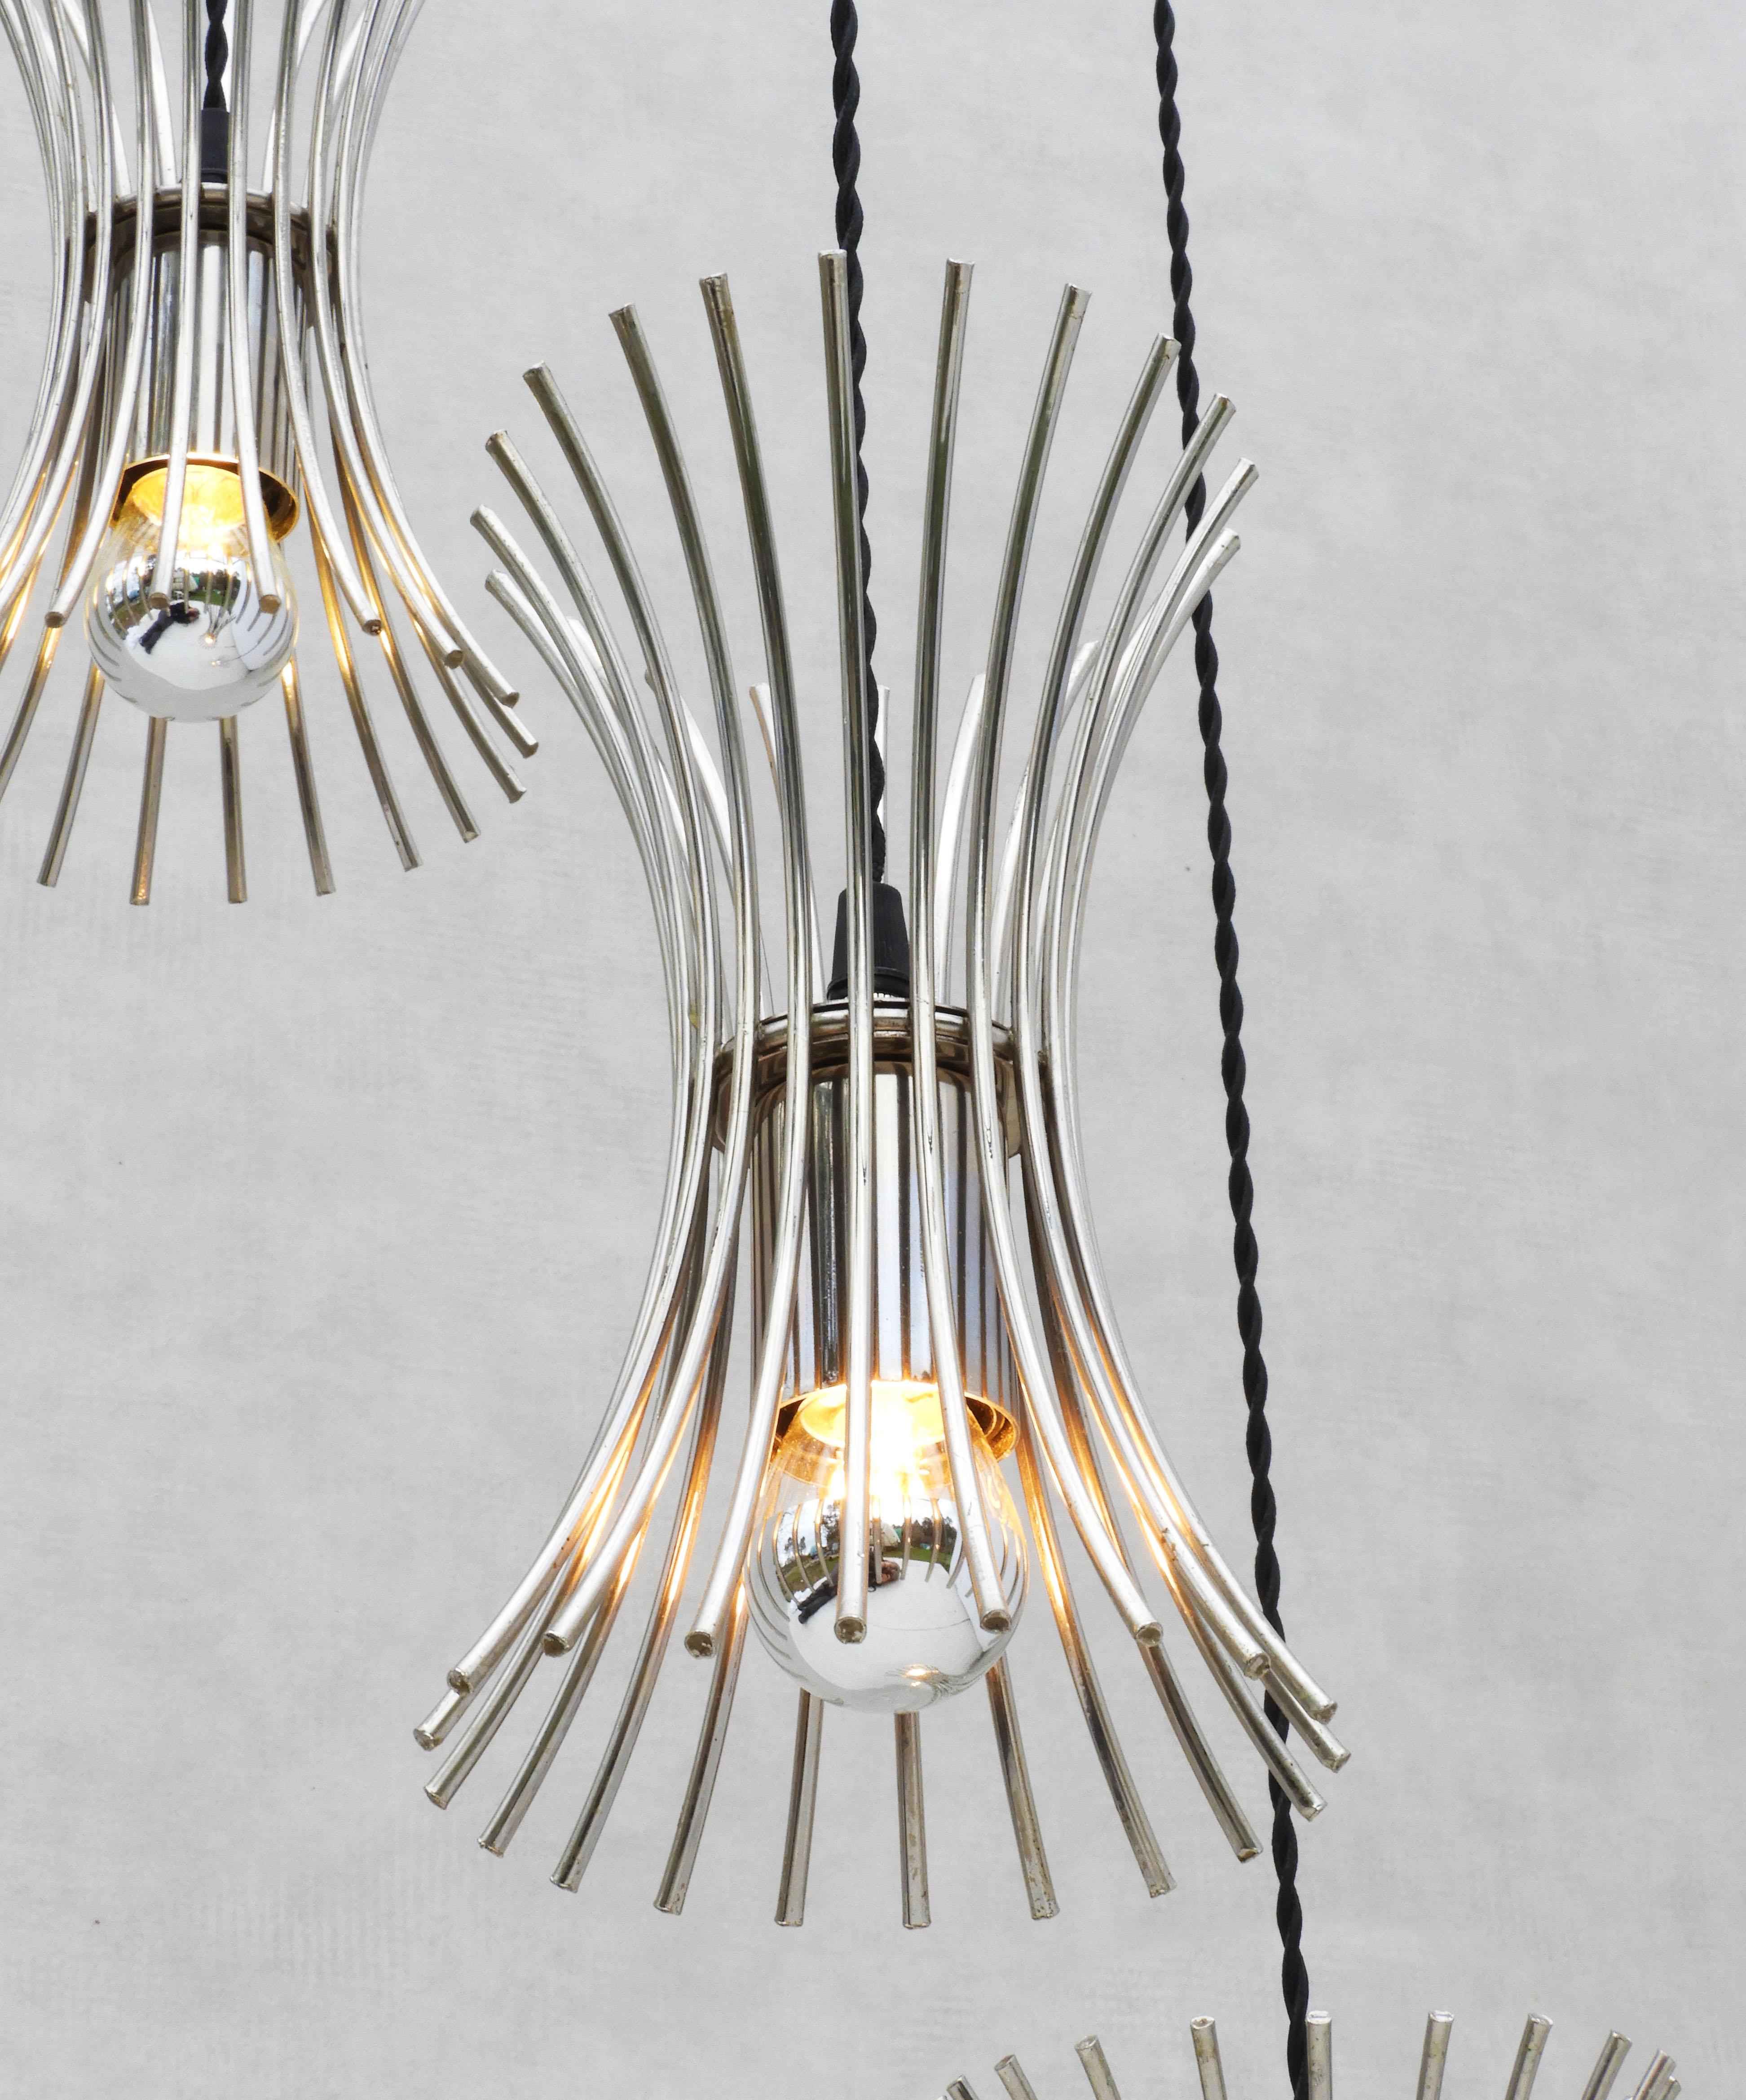 Unusual Italian three-light cascade chandelier C1970.
A trio of pronged cylindrical hourglass forms in chrome, suspended from a central three-armed ceiling rose.  The drop(s) on this striking light fitting can be adjusted to suit your requirements